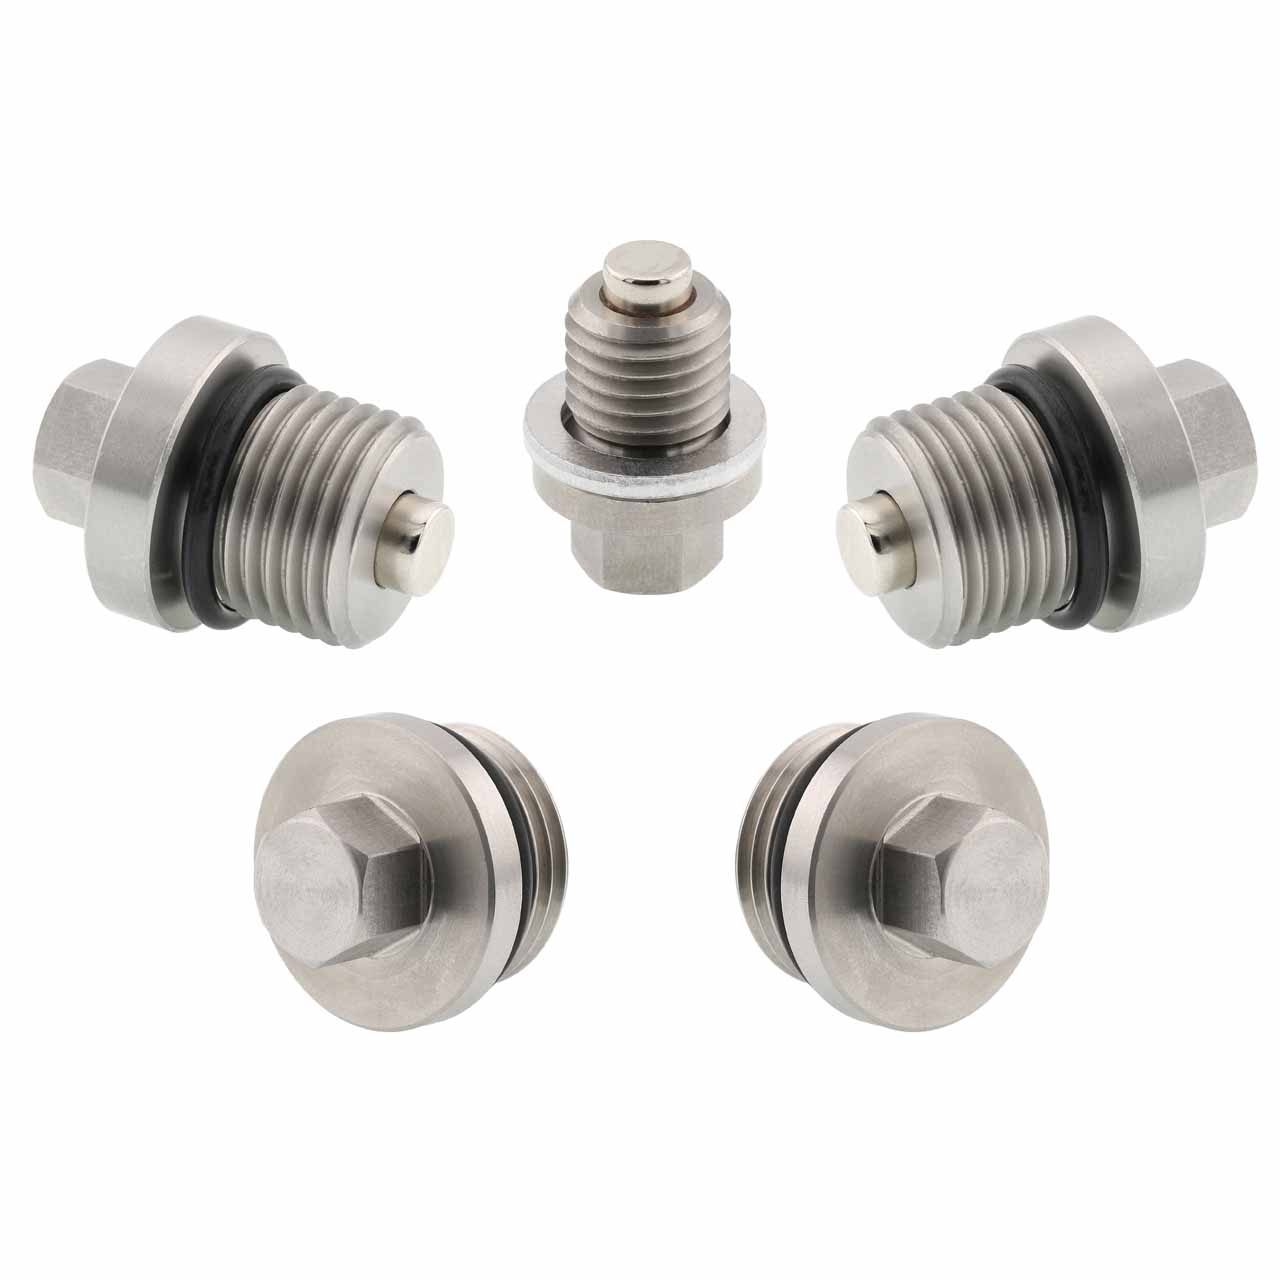 Polaris ACE 570 Magnetic Oil Drain Plug Kit - 2016-2017 - Engine, Transmission, Differential - Made In USA